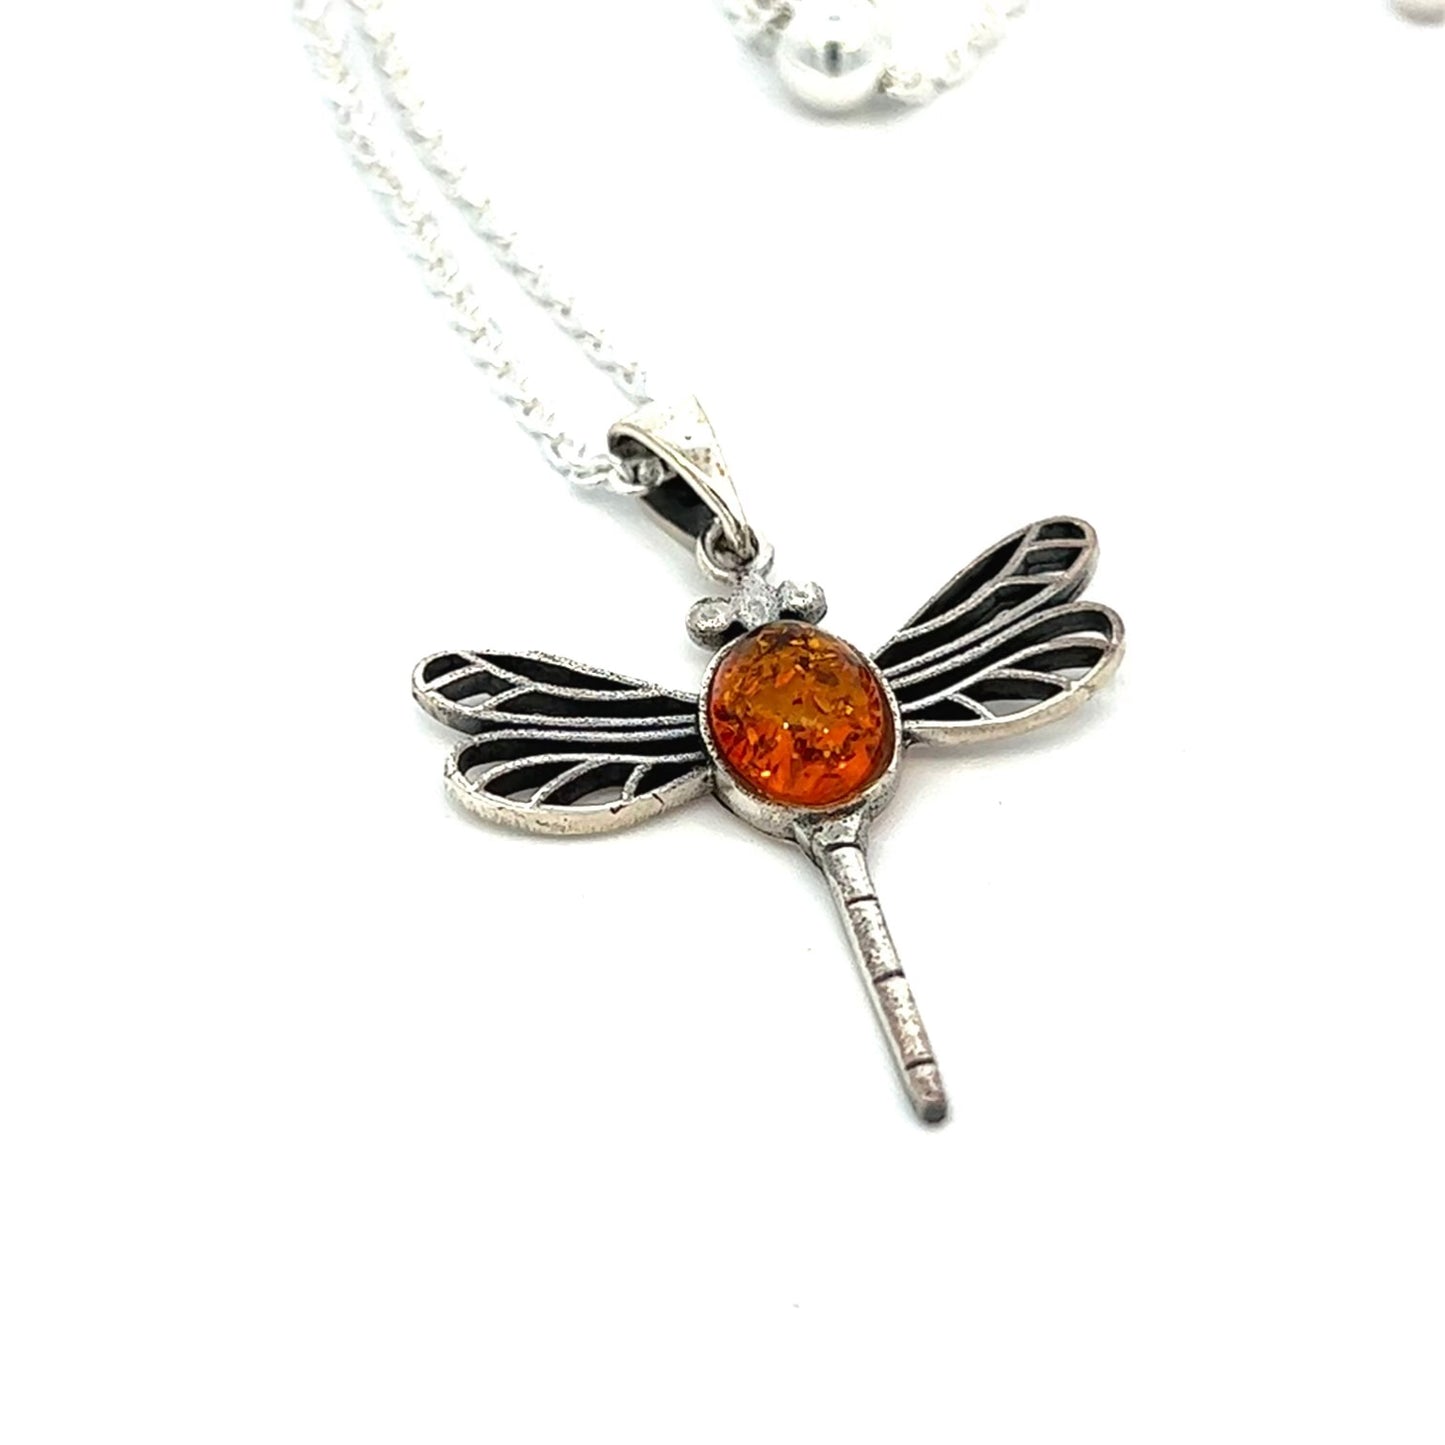 Amber Dragonfly Pendant Necklace with Amber Adjustable Sterling Chain